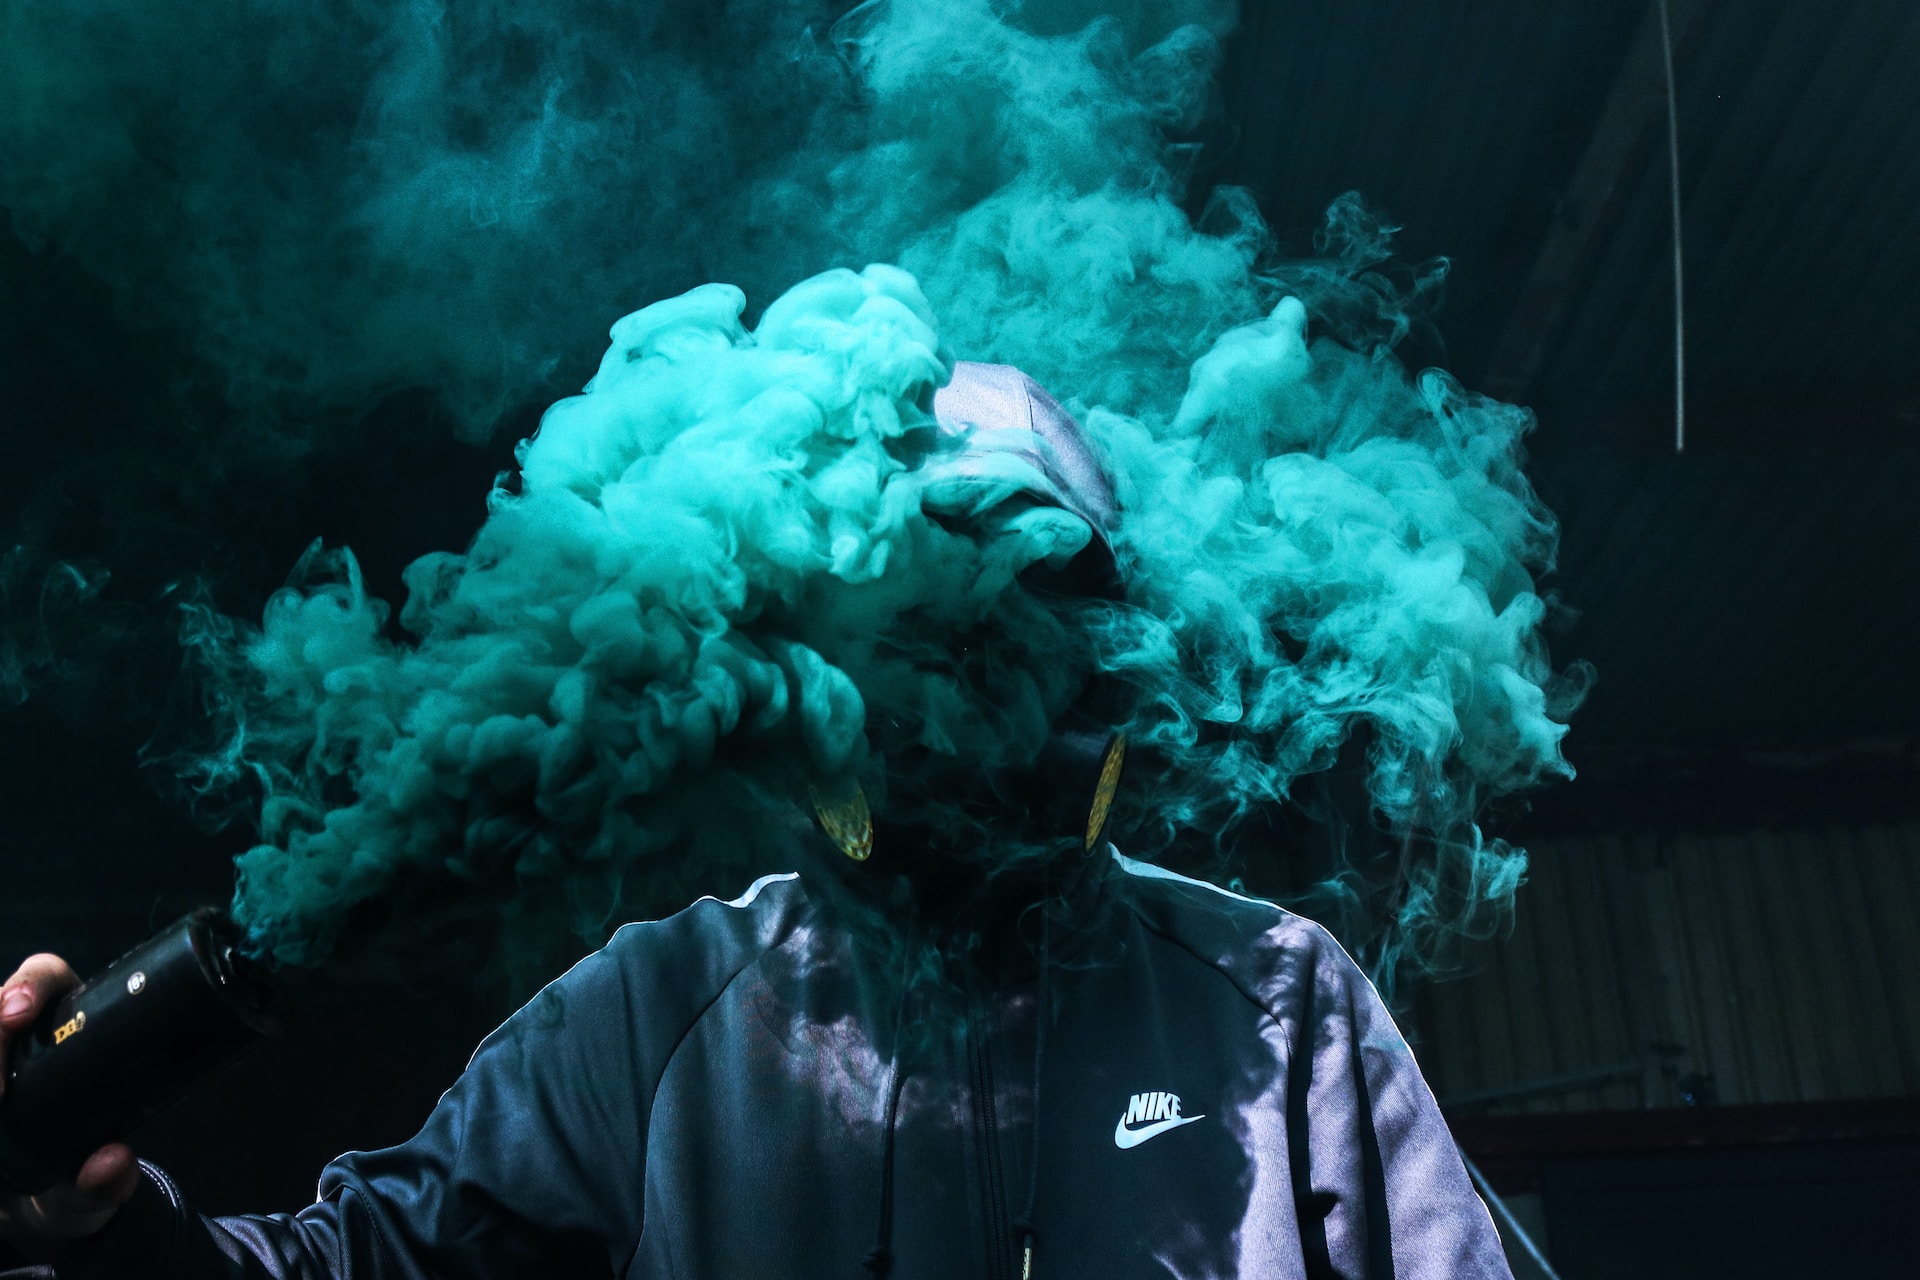 Nike Smoke Branding - Brand: Guide To Building A Strong Identity